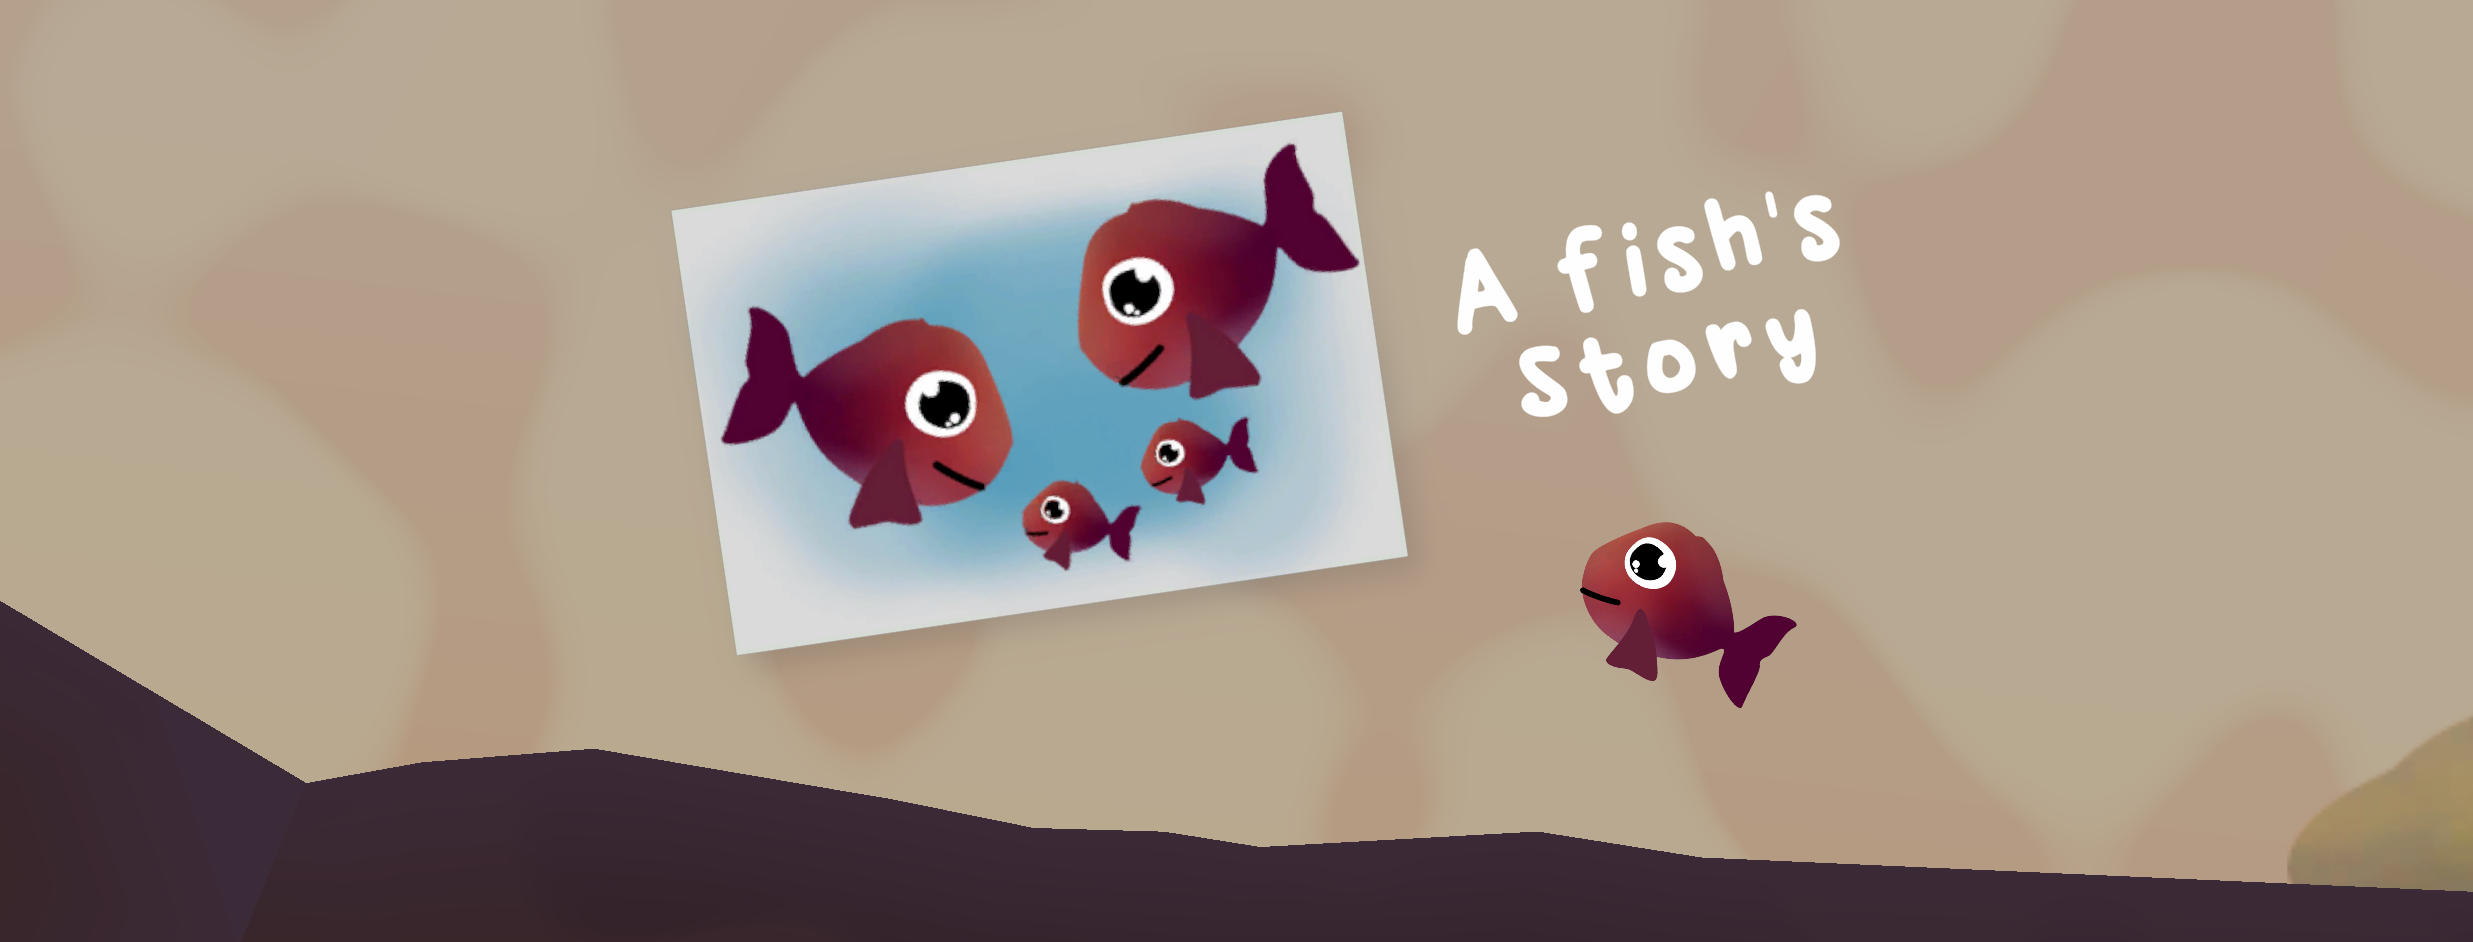 A Fish's story